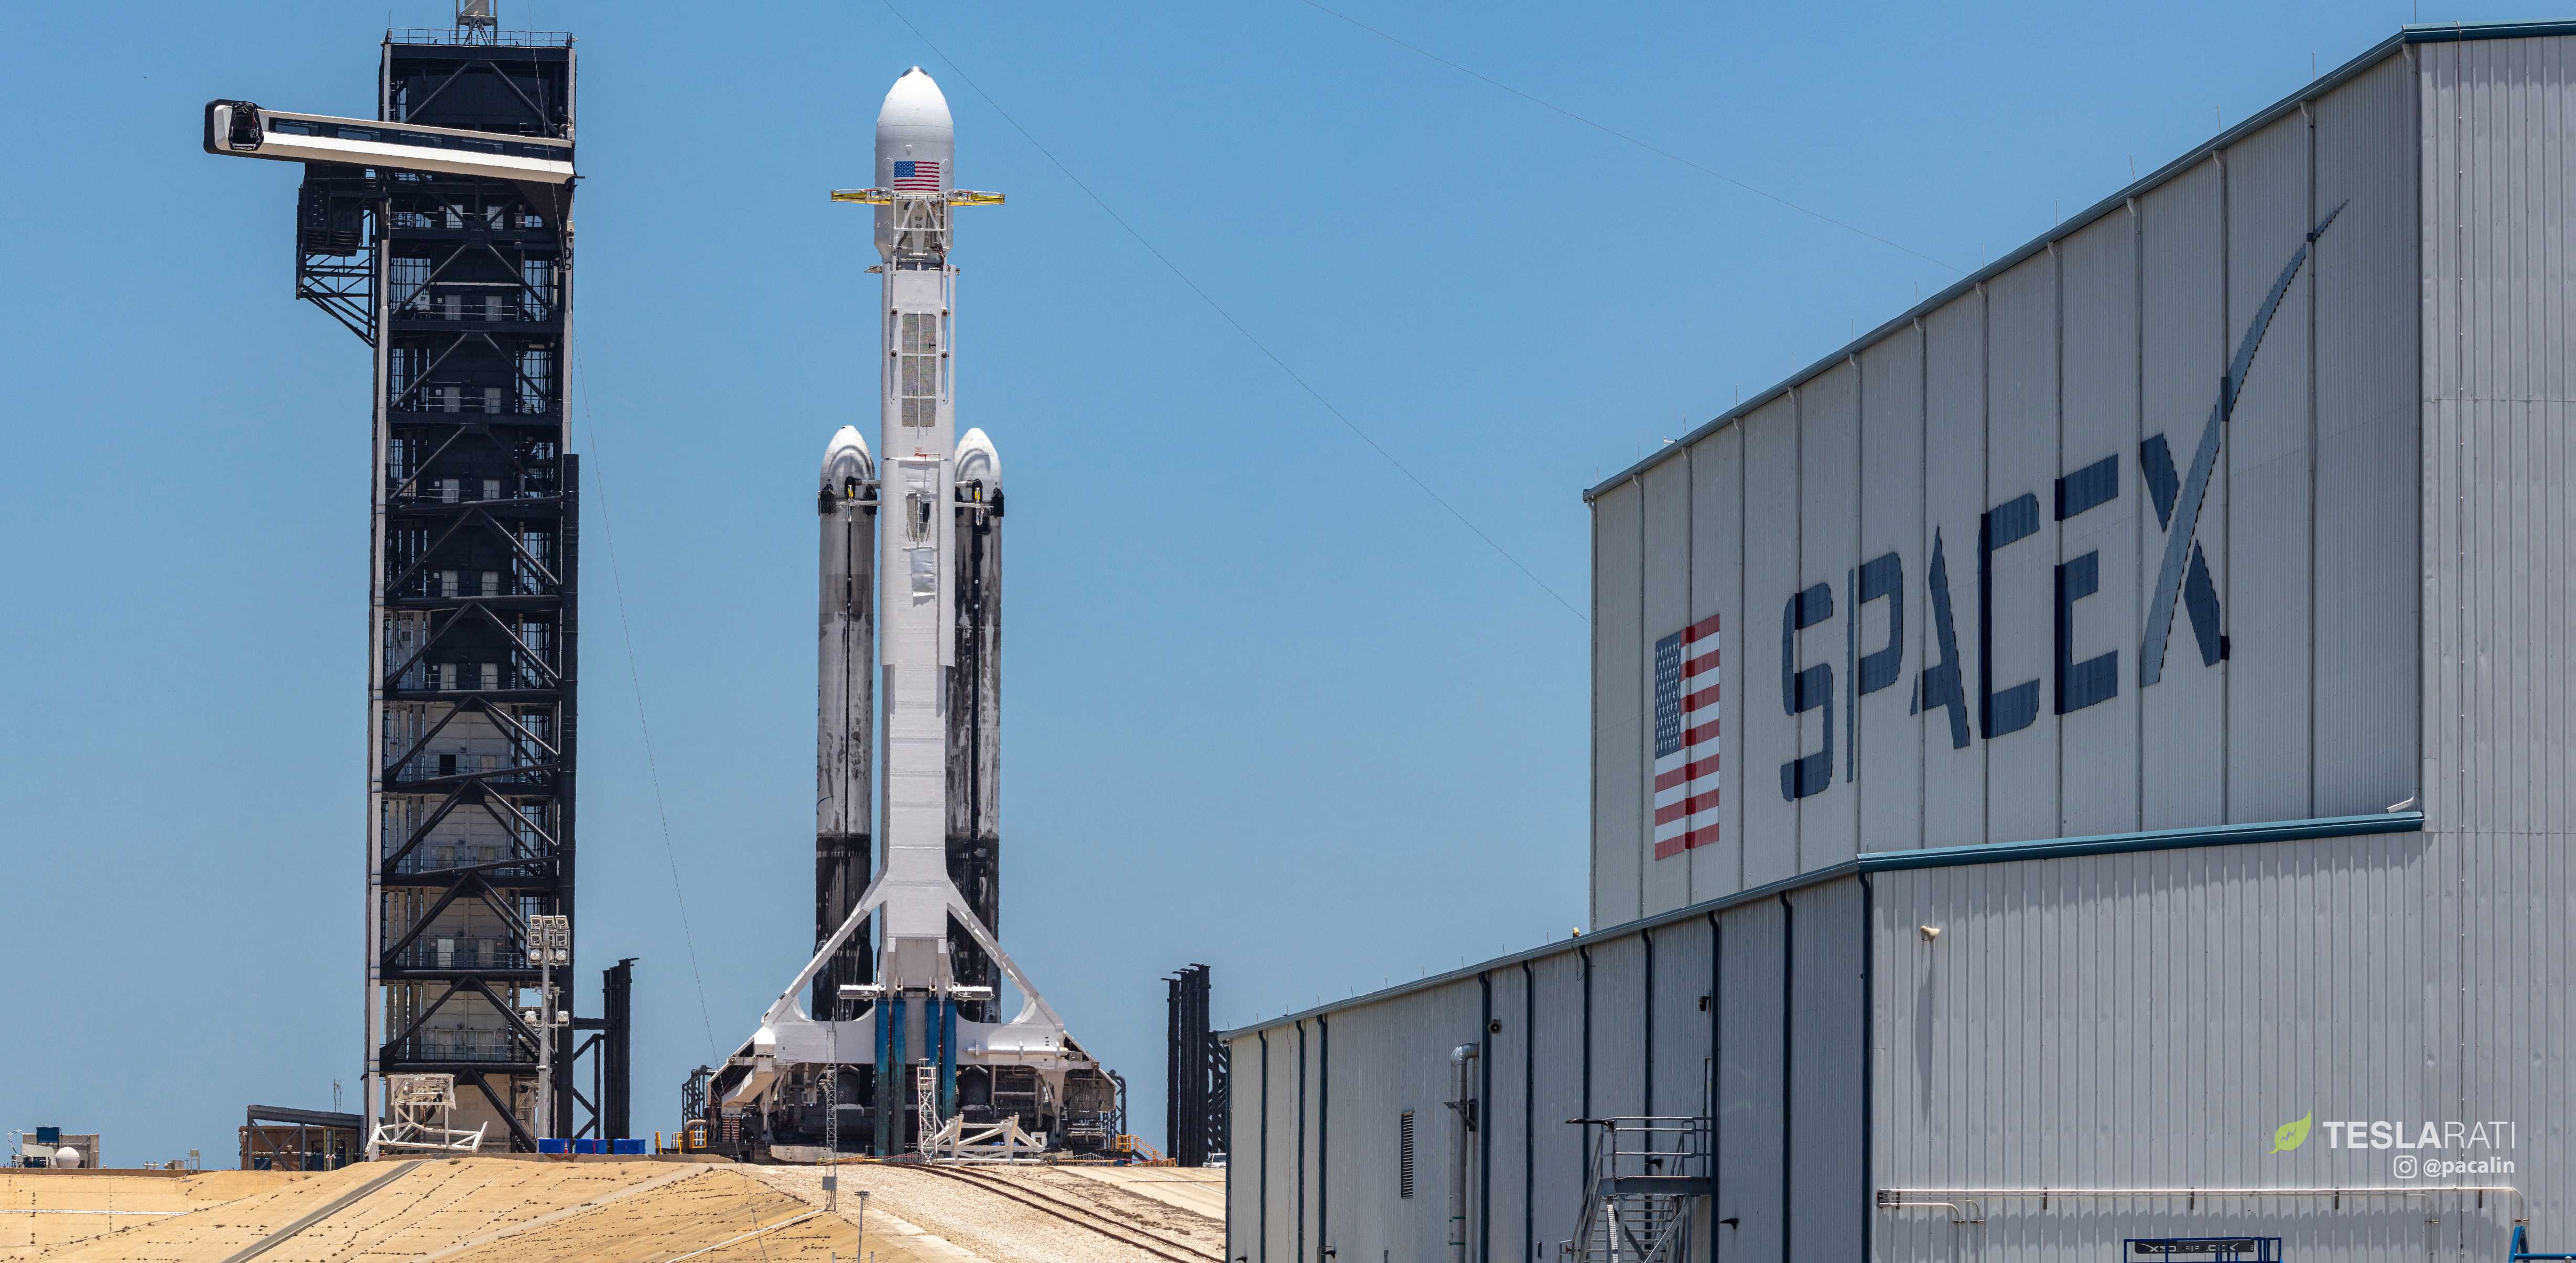 SpaceX's Falcon rockets might need a giant tower on wheels for US ...